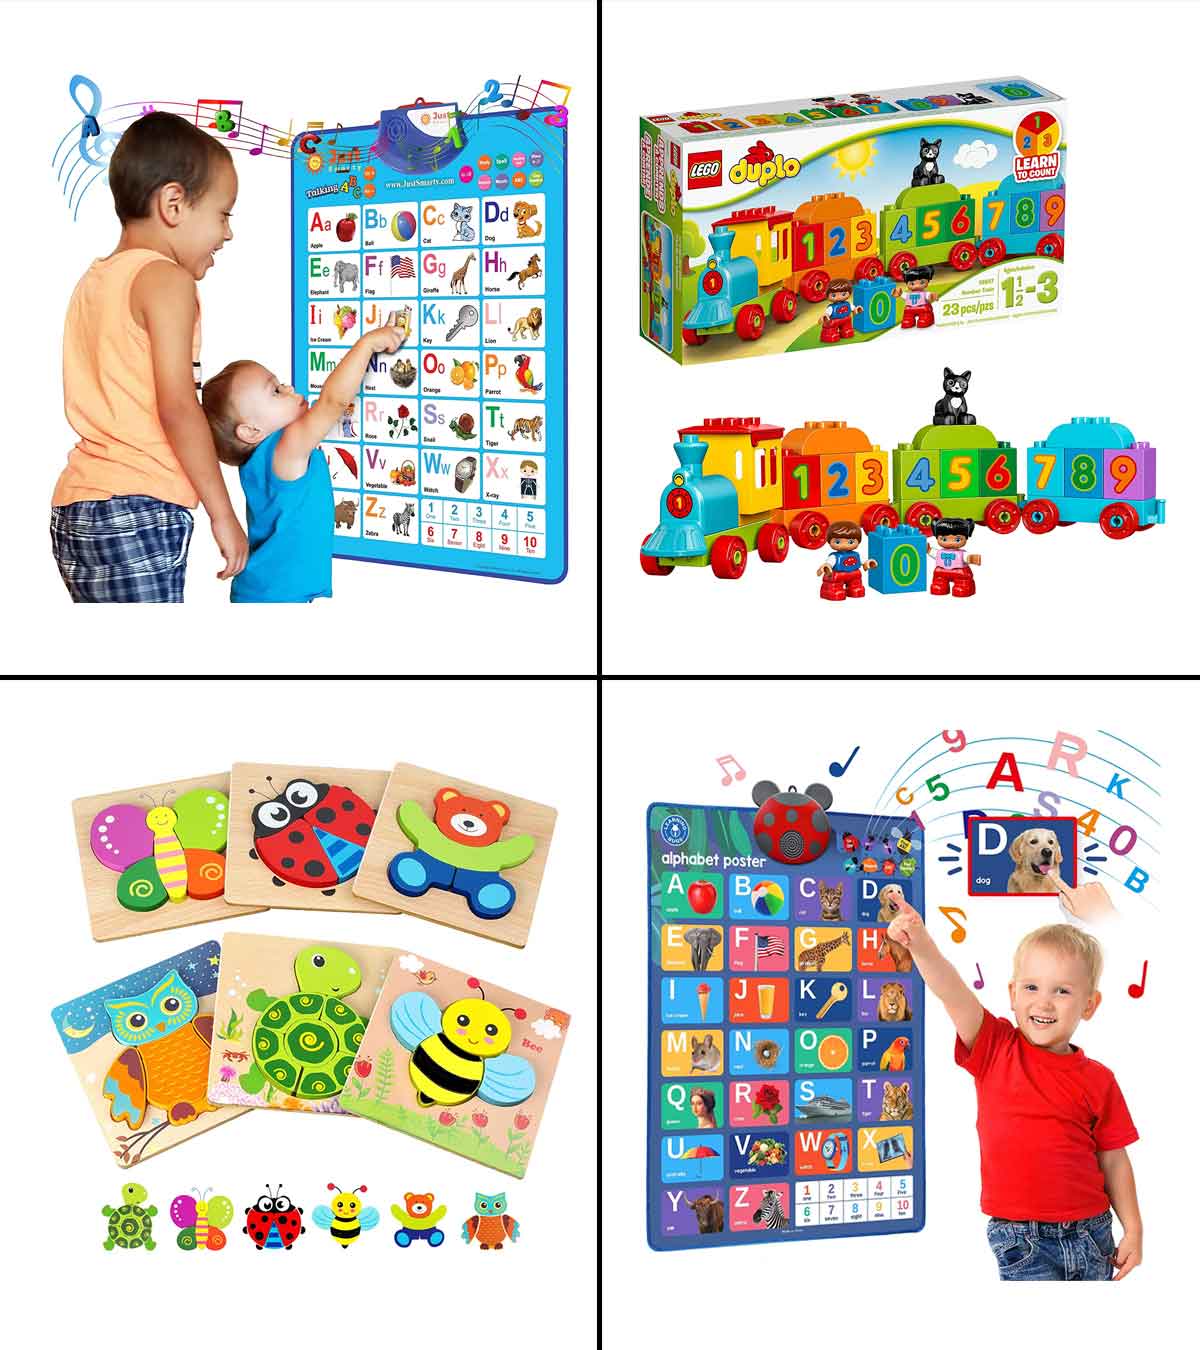 Educational Preschool Toys for Kids - Learn Words, Colors, Songs, Animals,  and More! 